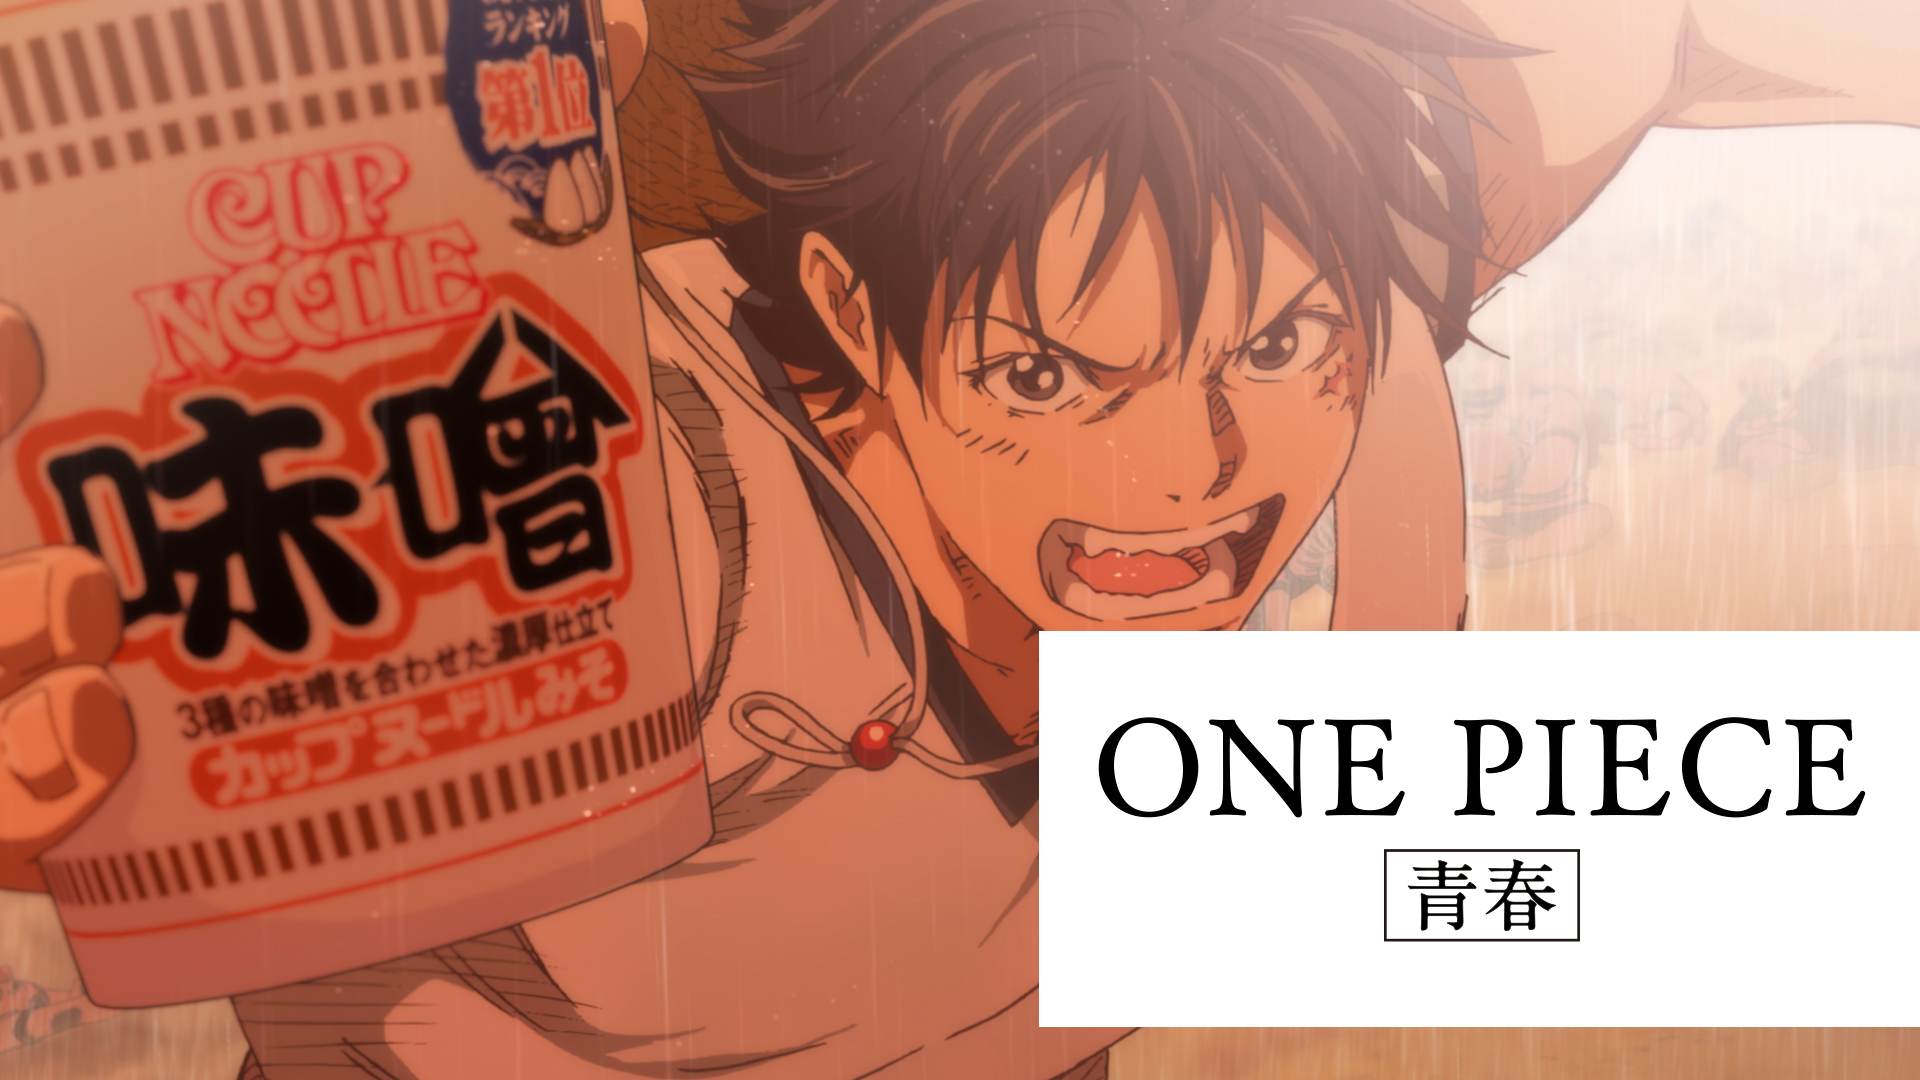 One Piece S Luffy Ace And Whitebeard Appear In Anime S Final Commercial Collaboration With Nissin Cup Noodles Moshi Moshi Nippon もしもしにっぽん